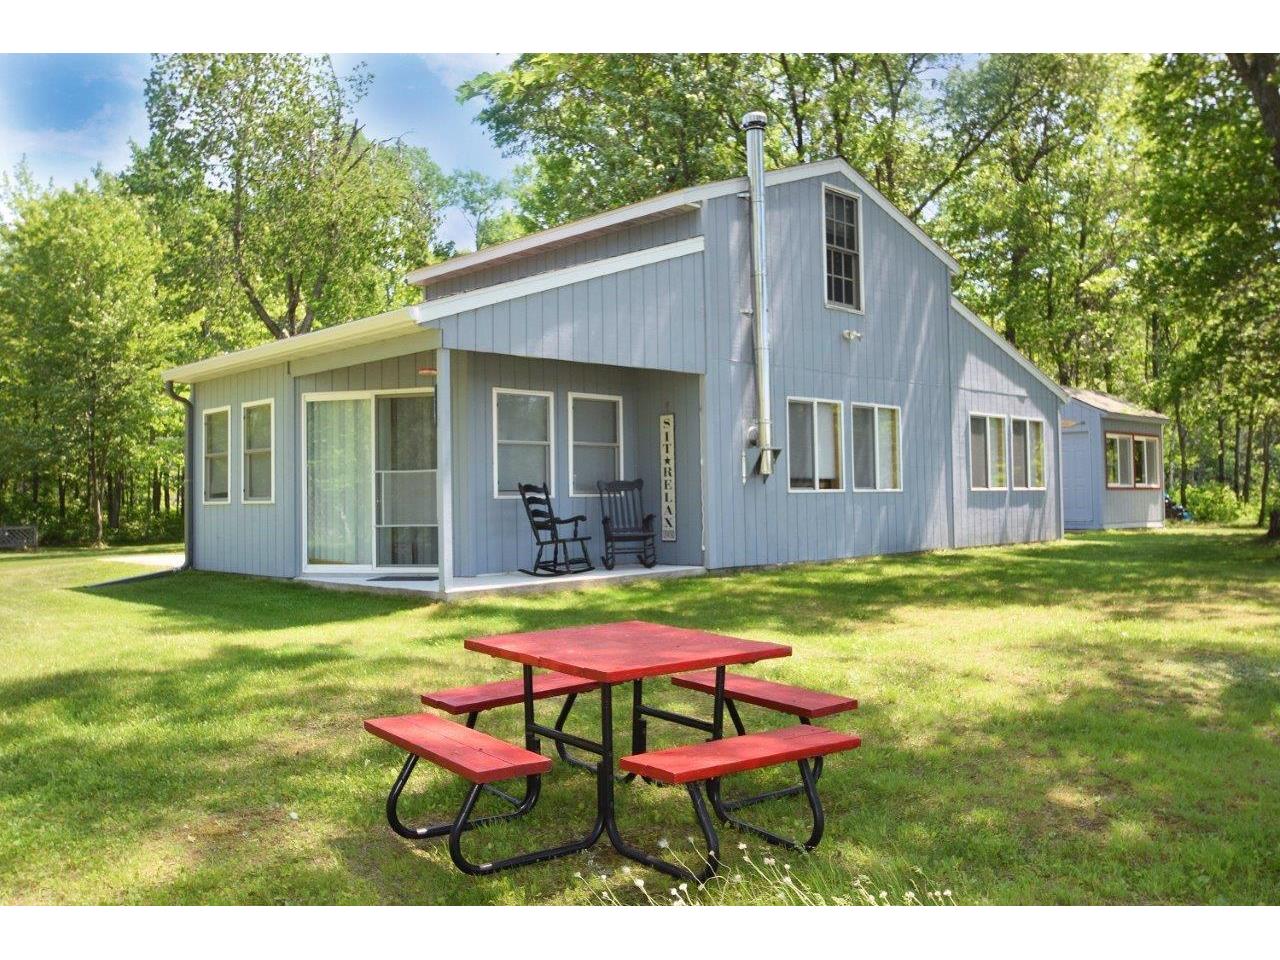 27893 N Point Lake Road Webster WI 54893 - Point 6003257 image1